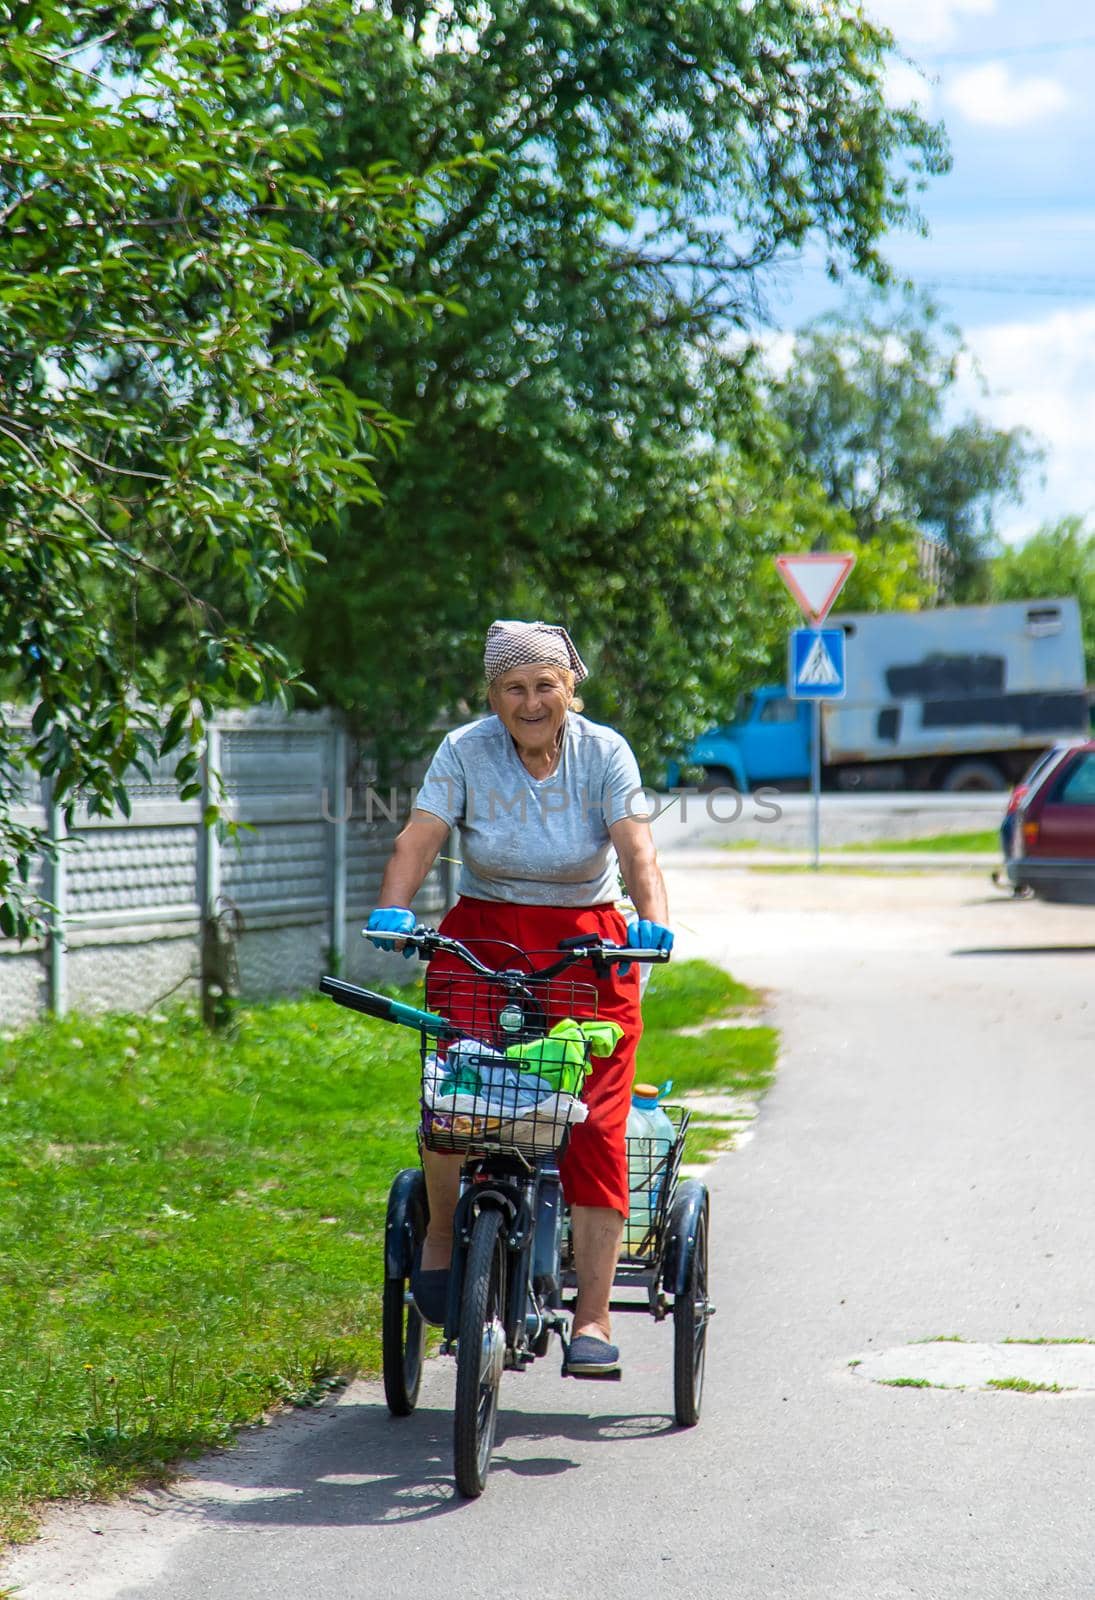 An old woman rides a bicycle. Selection focus. Nature.